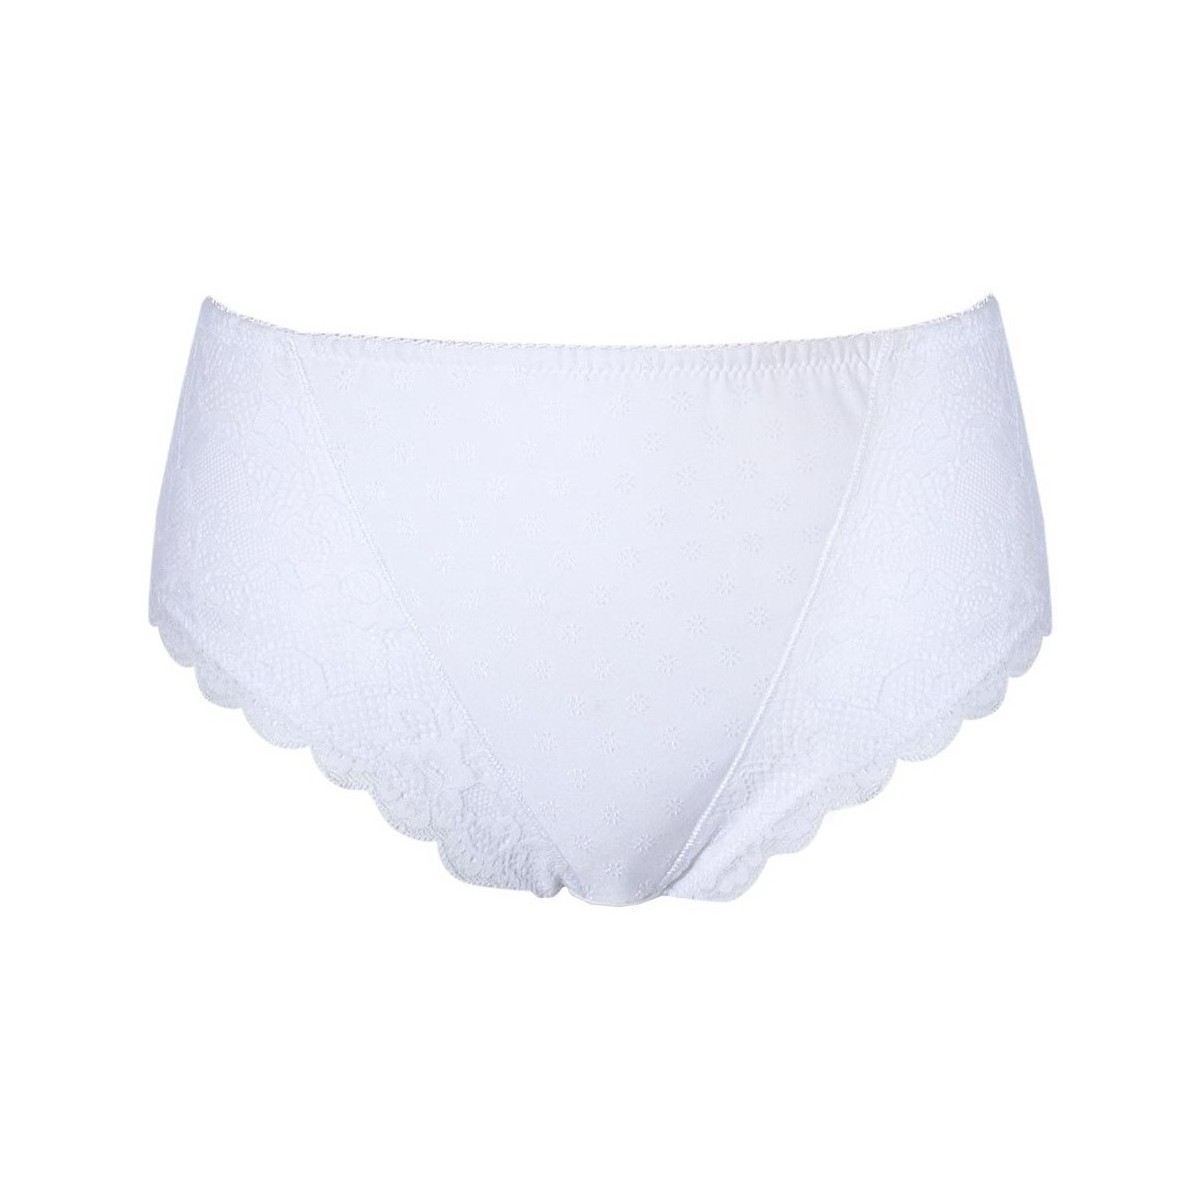 Pomm´poire Blanc Culotte midi blanche Calyopée AnG